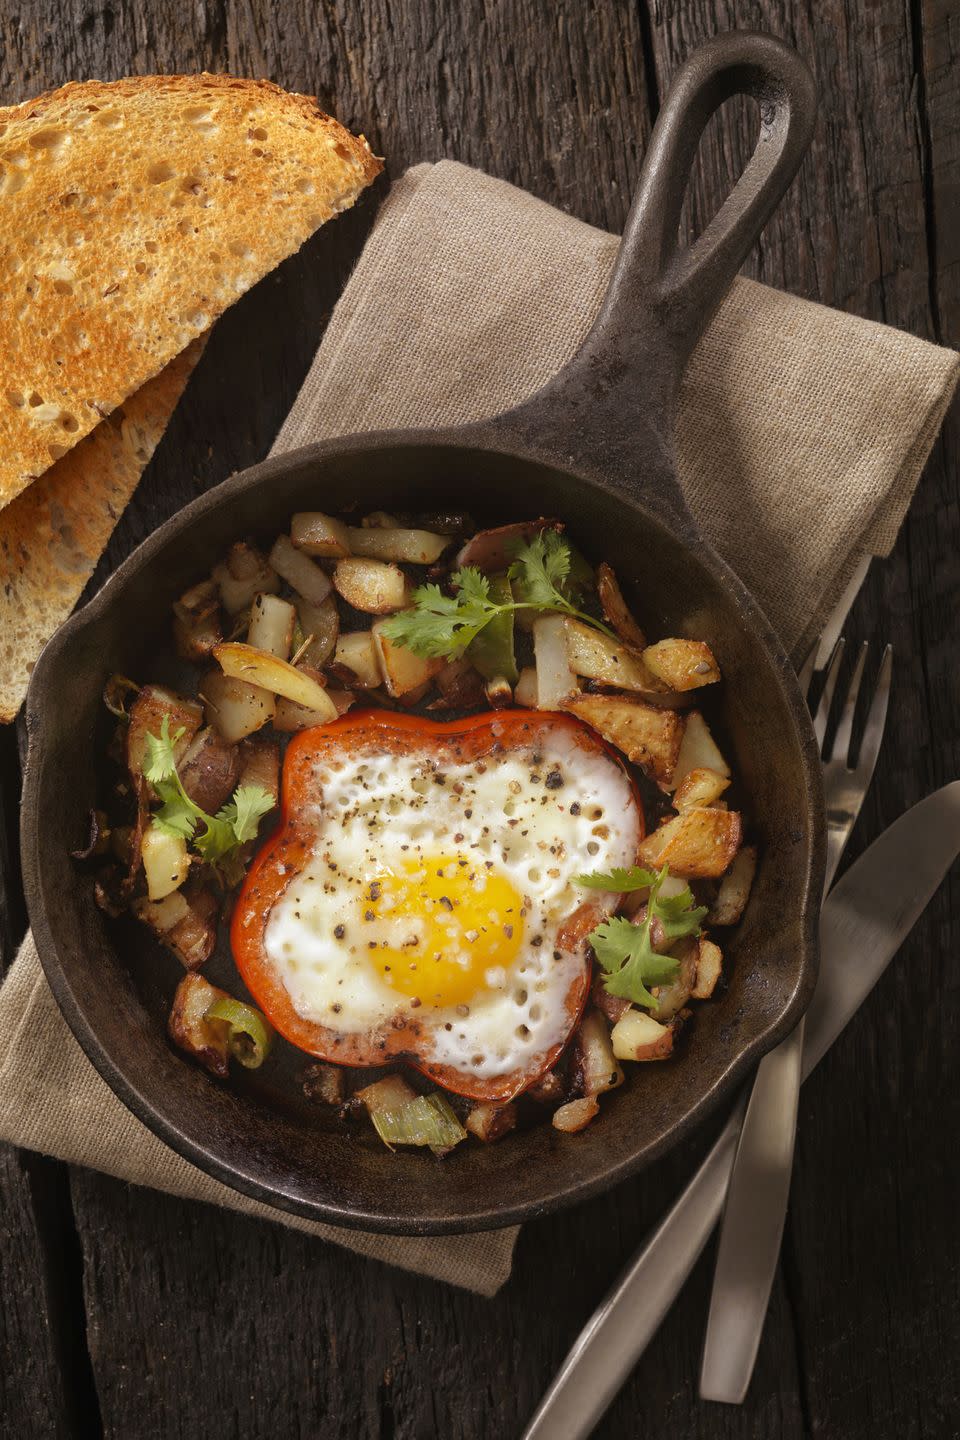 <p>Potatoes, red pepper, beans, and bacon (yep, bacon!) all go into this rustic meal. And you still get a package of <a href="https://fave.co/2KGnmsL" rel="nofollow noopener" target="_blank" data-ylk="slk:Dole Banana Dippers" class="link rapid-noclick-resp">Dole Banana Dippers</a> for dessert.</p><p><a href="https://www.goodhousekeeping.com/food-recipes/a5774/sunday-night-vegetable-hash-2332/" rel="nofollow noopener" target="_blank" data-ylk="slk:Get the recipe for Sunday Night Vegetable Hash »" class="link rapid-noclick-resp"><em>Get the recipe for Sunday Night Vegetable Hash »</em></a></p>